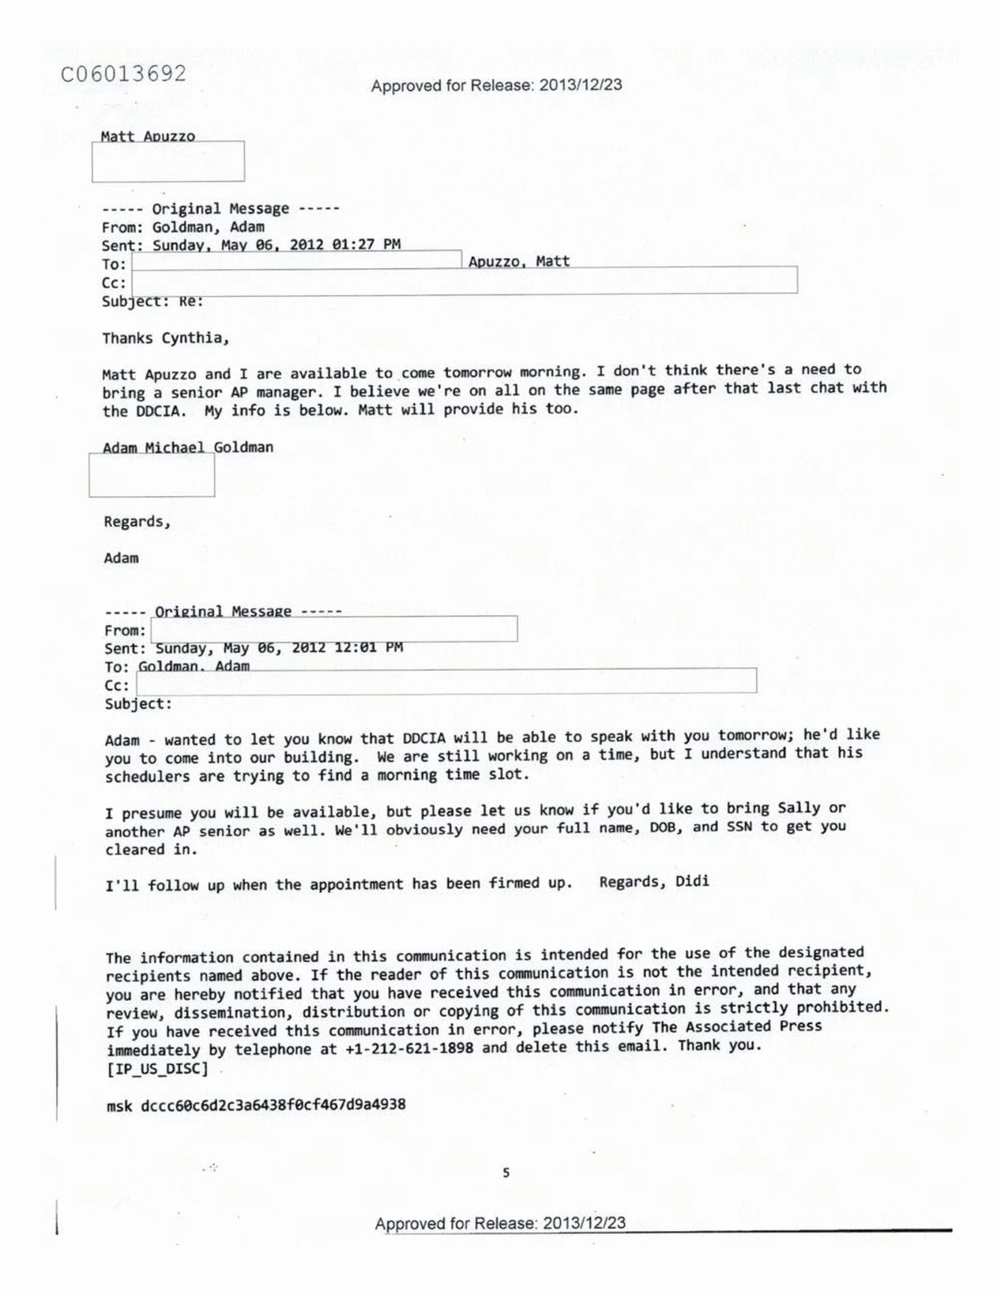 Page 553 from Email Correspondence Between Reporters and CIA Flacks